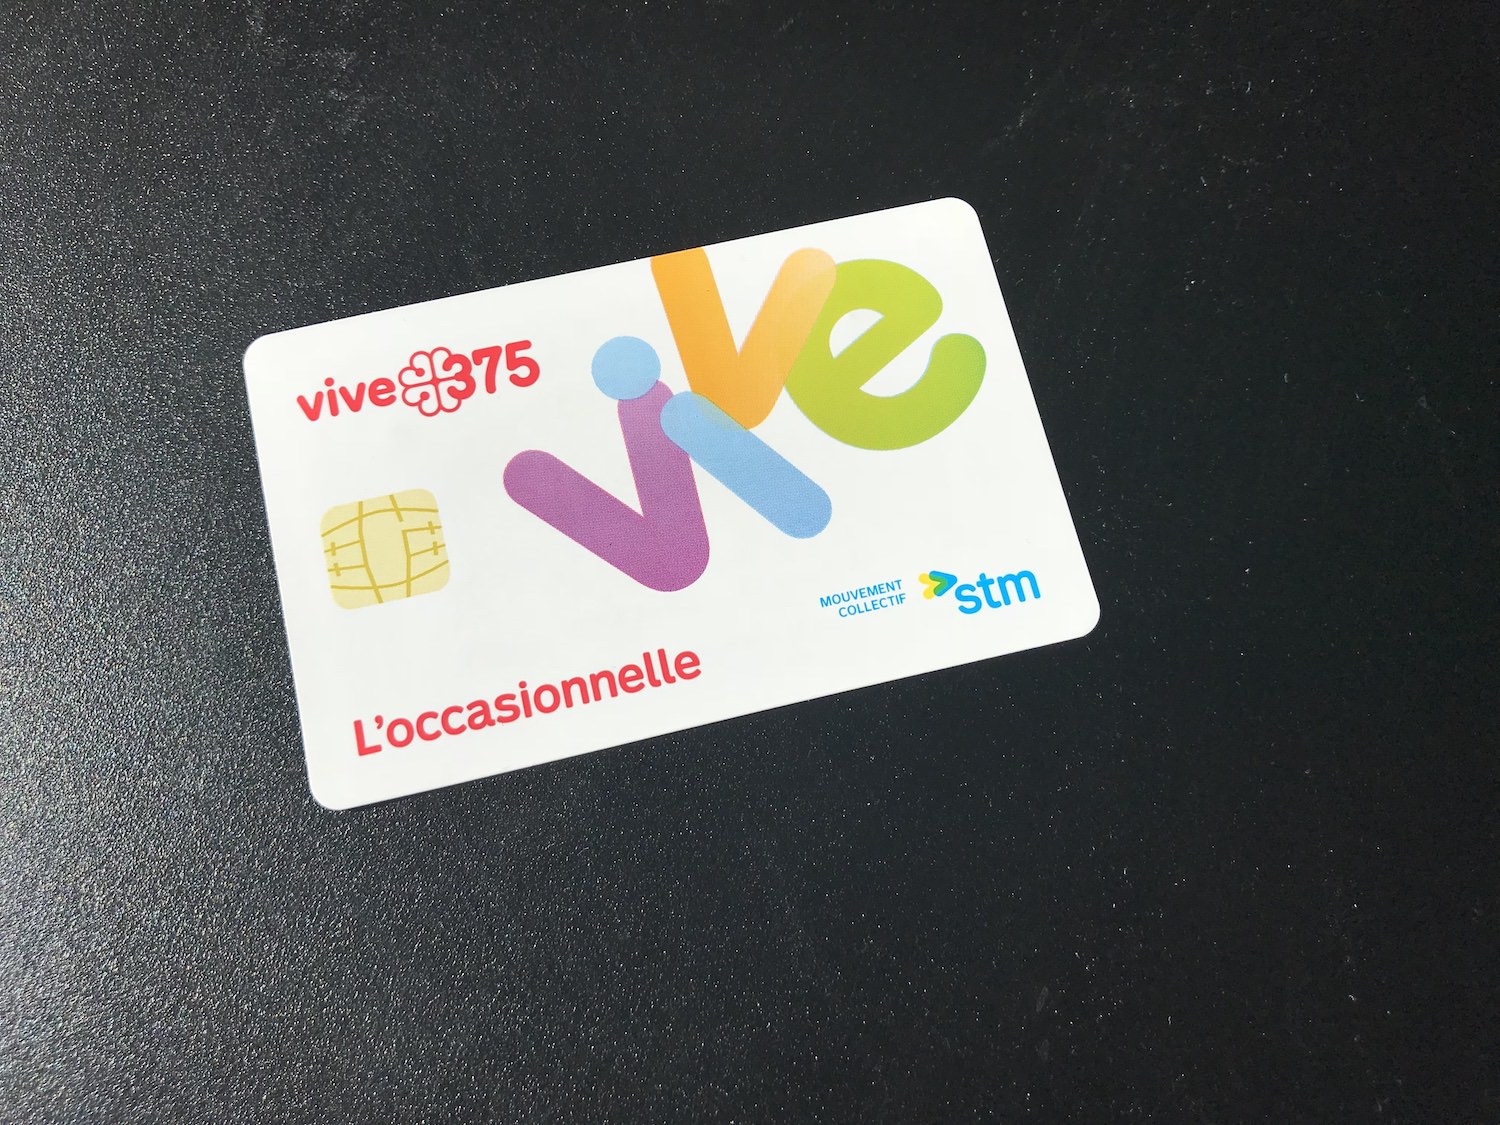 A card with colorful design saying "vive375", including a printed chip just like a credit card.